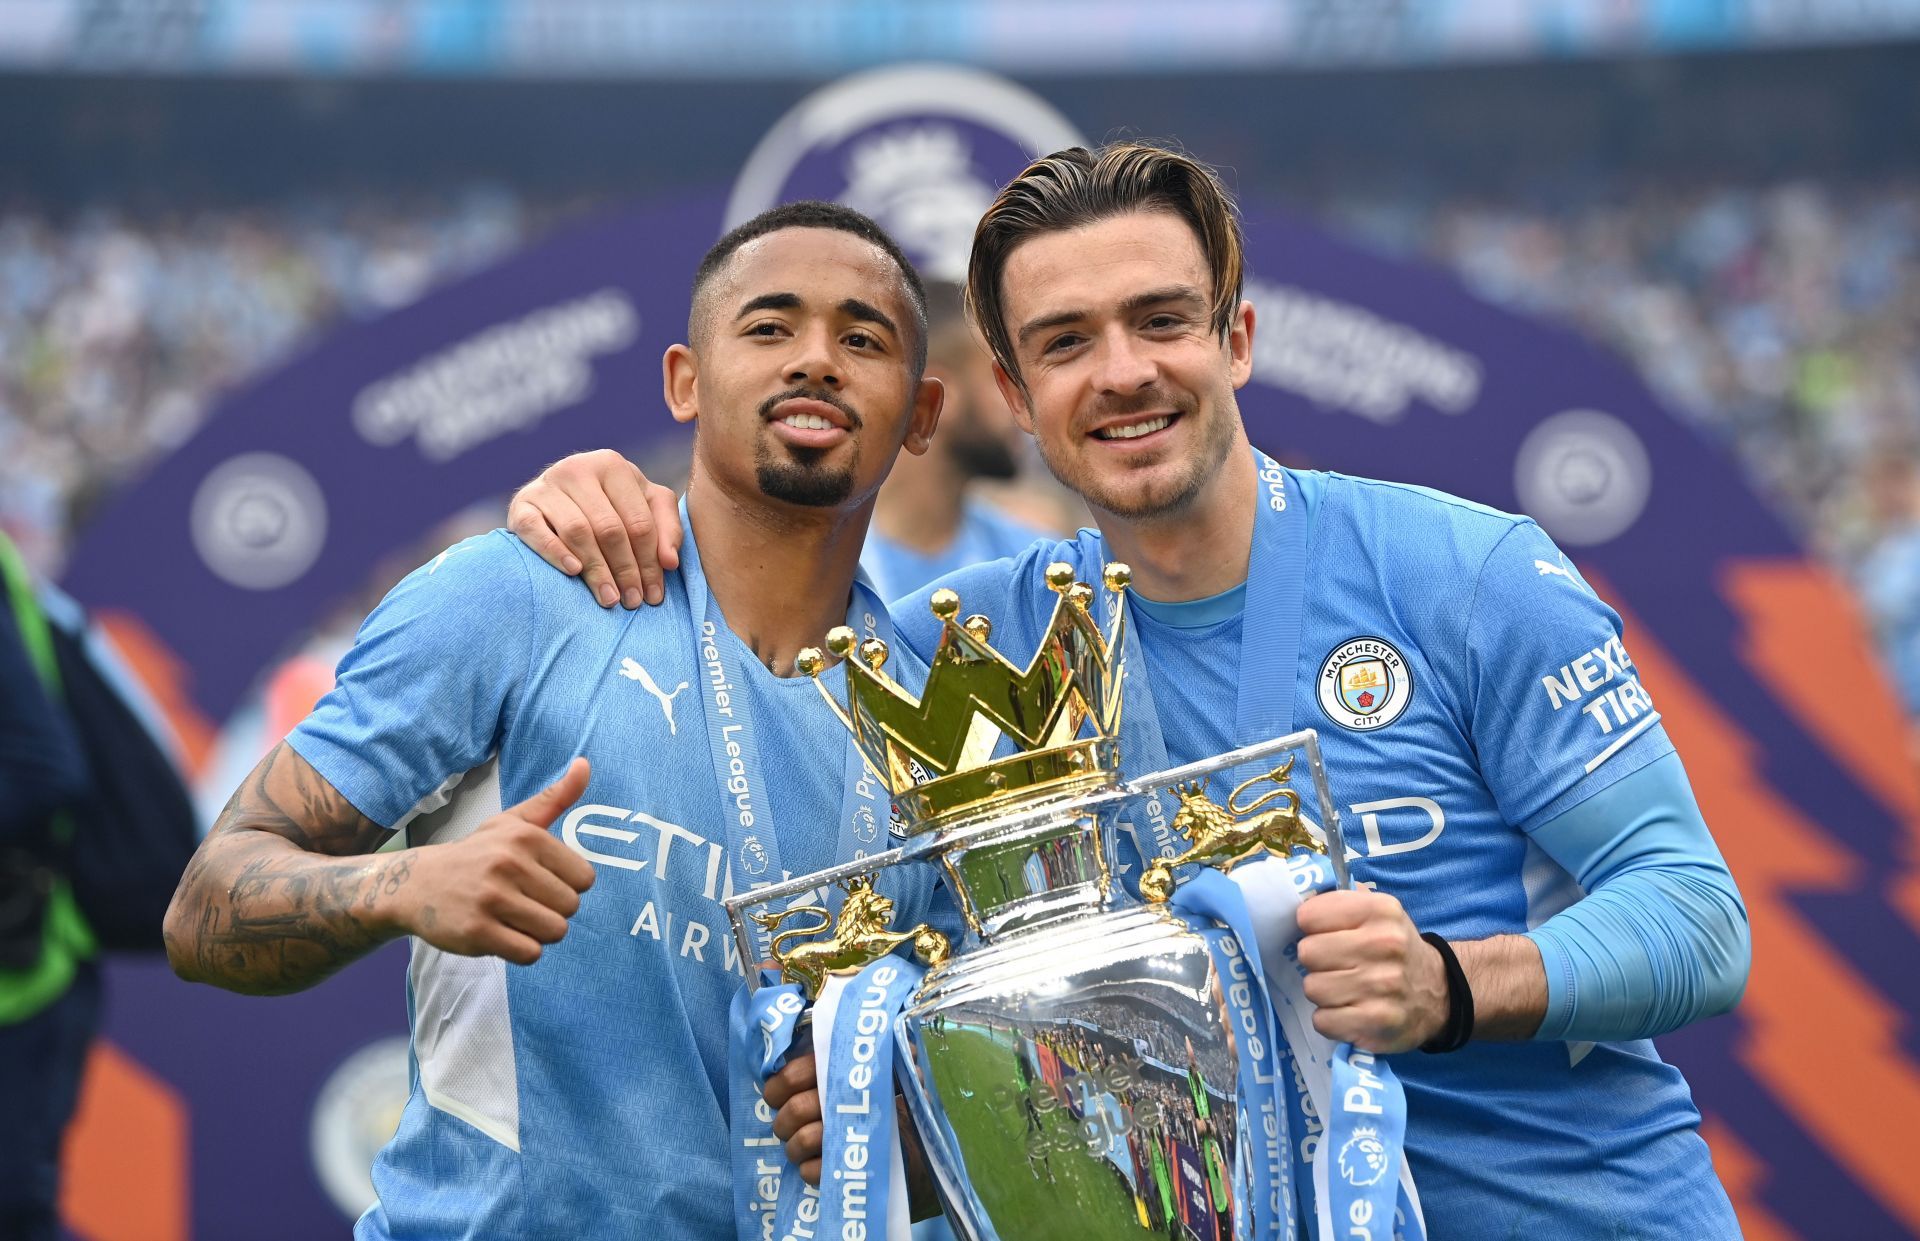 Gabriel Jesus has been successful at club and international level